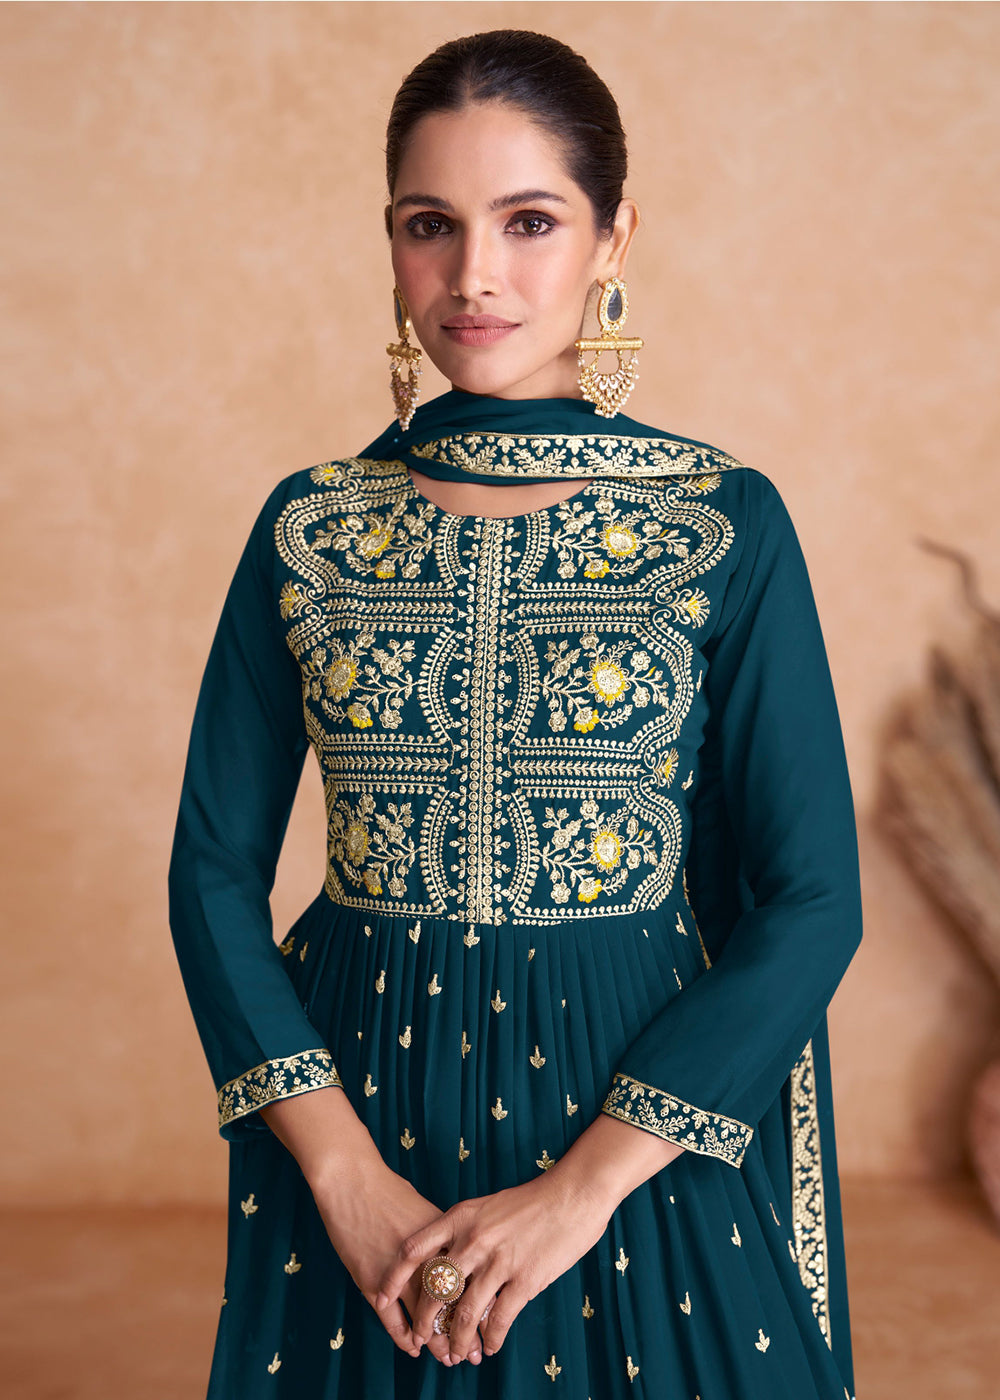 Buy Now Prussian Blue Wedding Embroidered Multicolor Palazzo Salwar Suit Online in USA, UK, Canada, Germany, Australia & Worldwide at Empress Clothing.